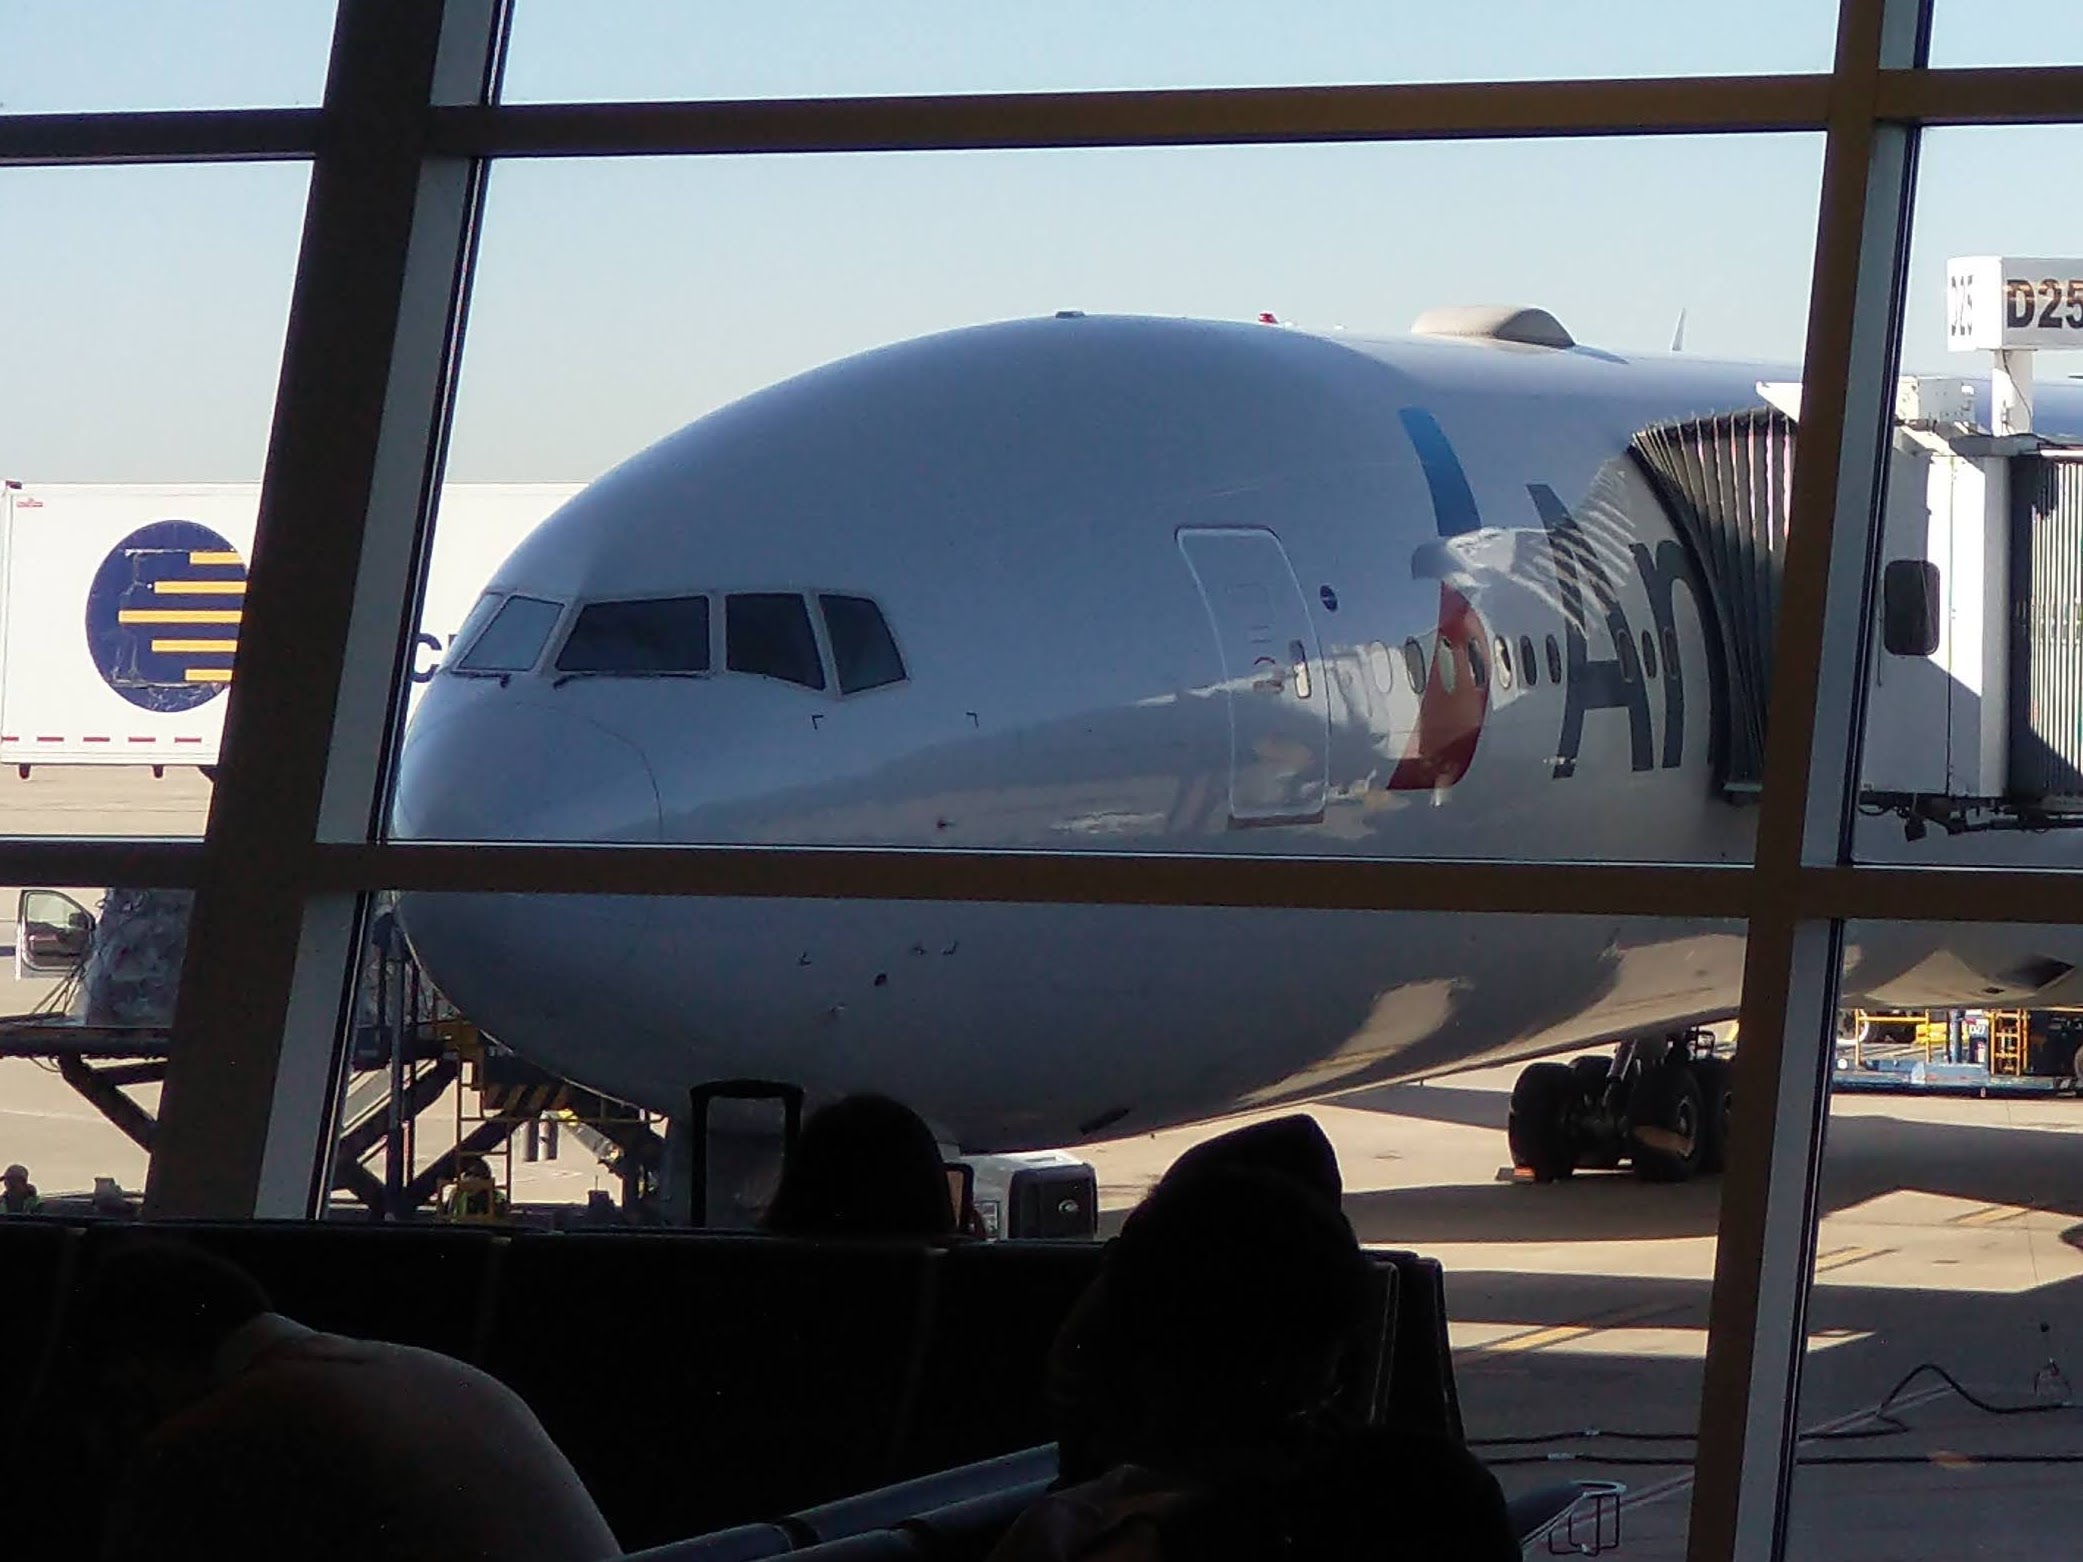 PICTURE OF MY BOEING 777-300 AT THE GATE IN DFW